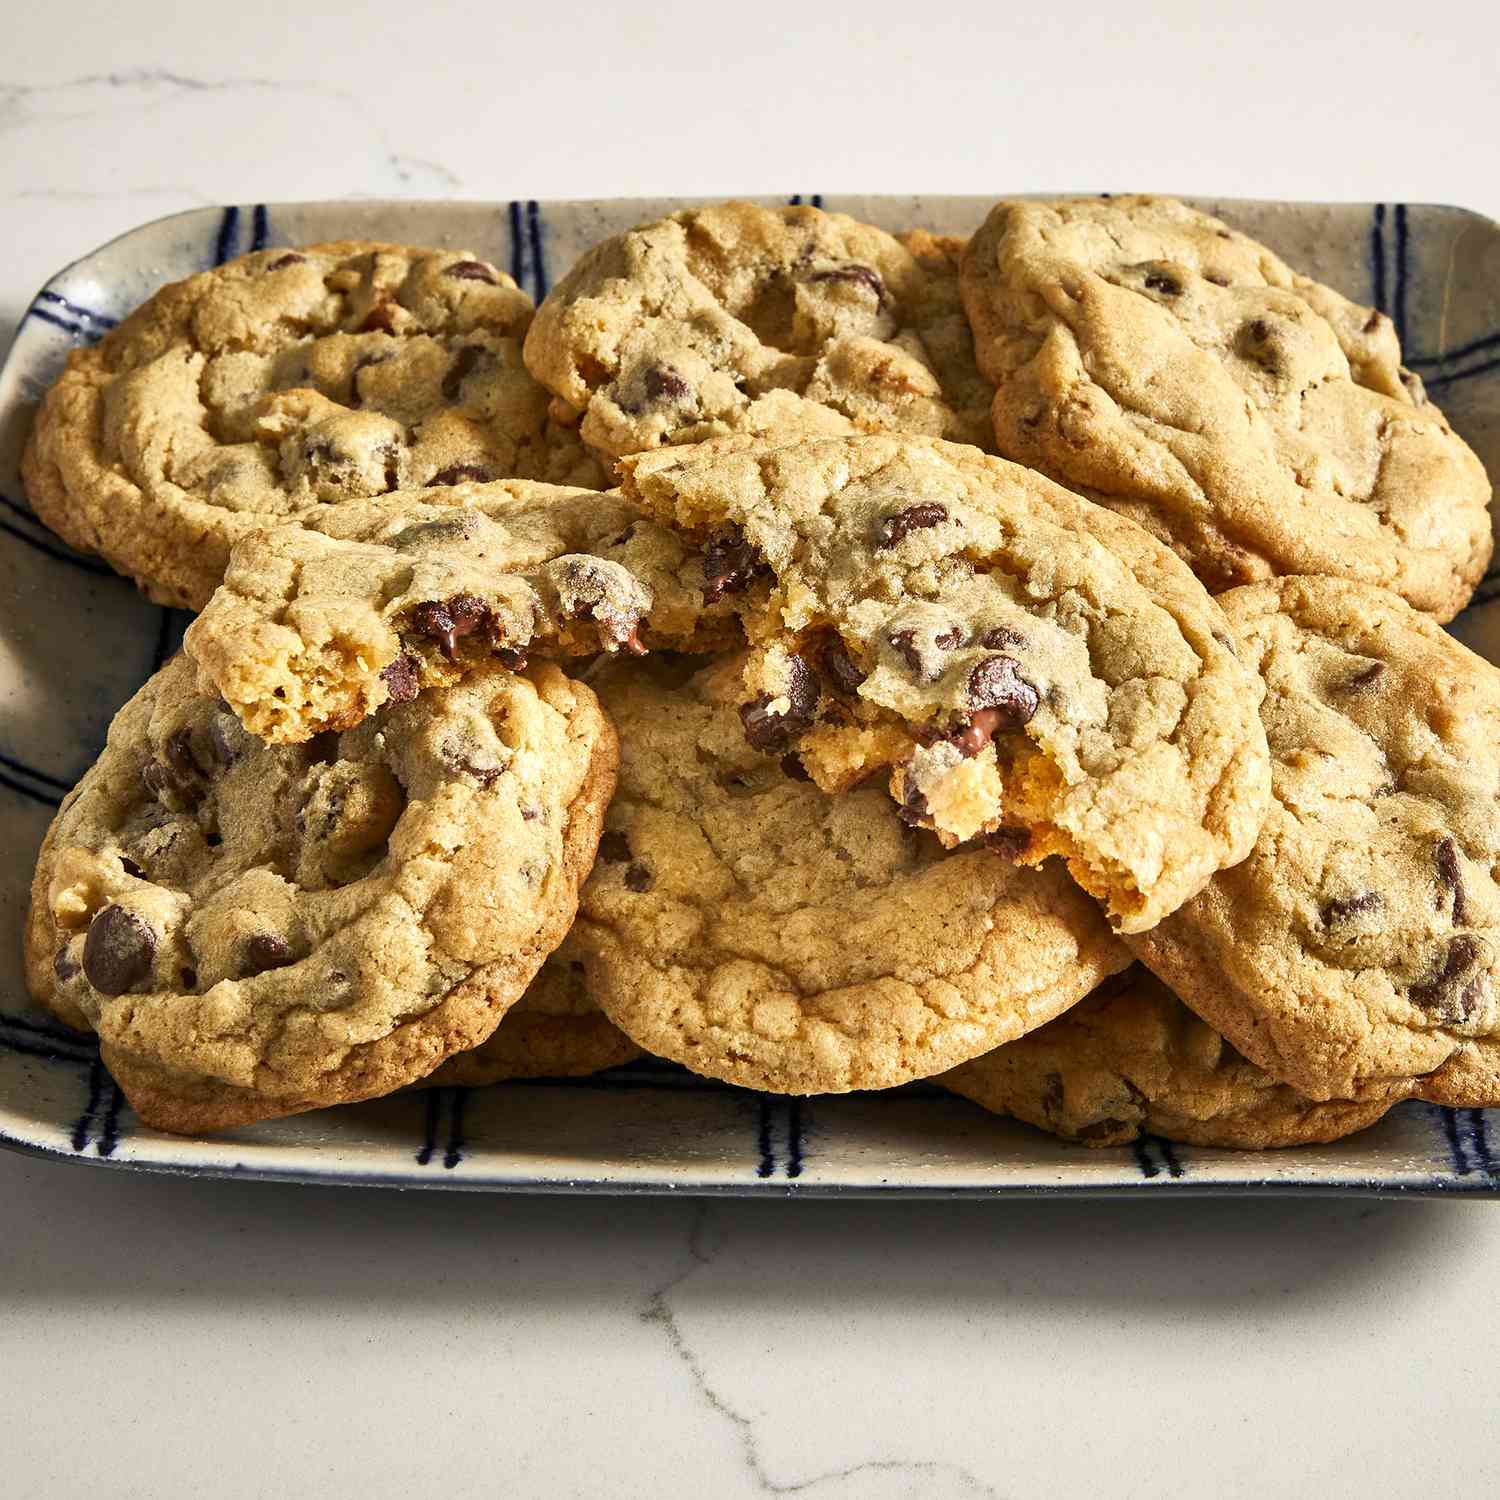 Homemade Two-Ingredient Chocolate Chips